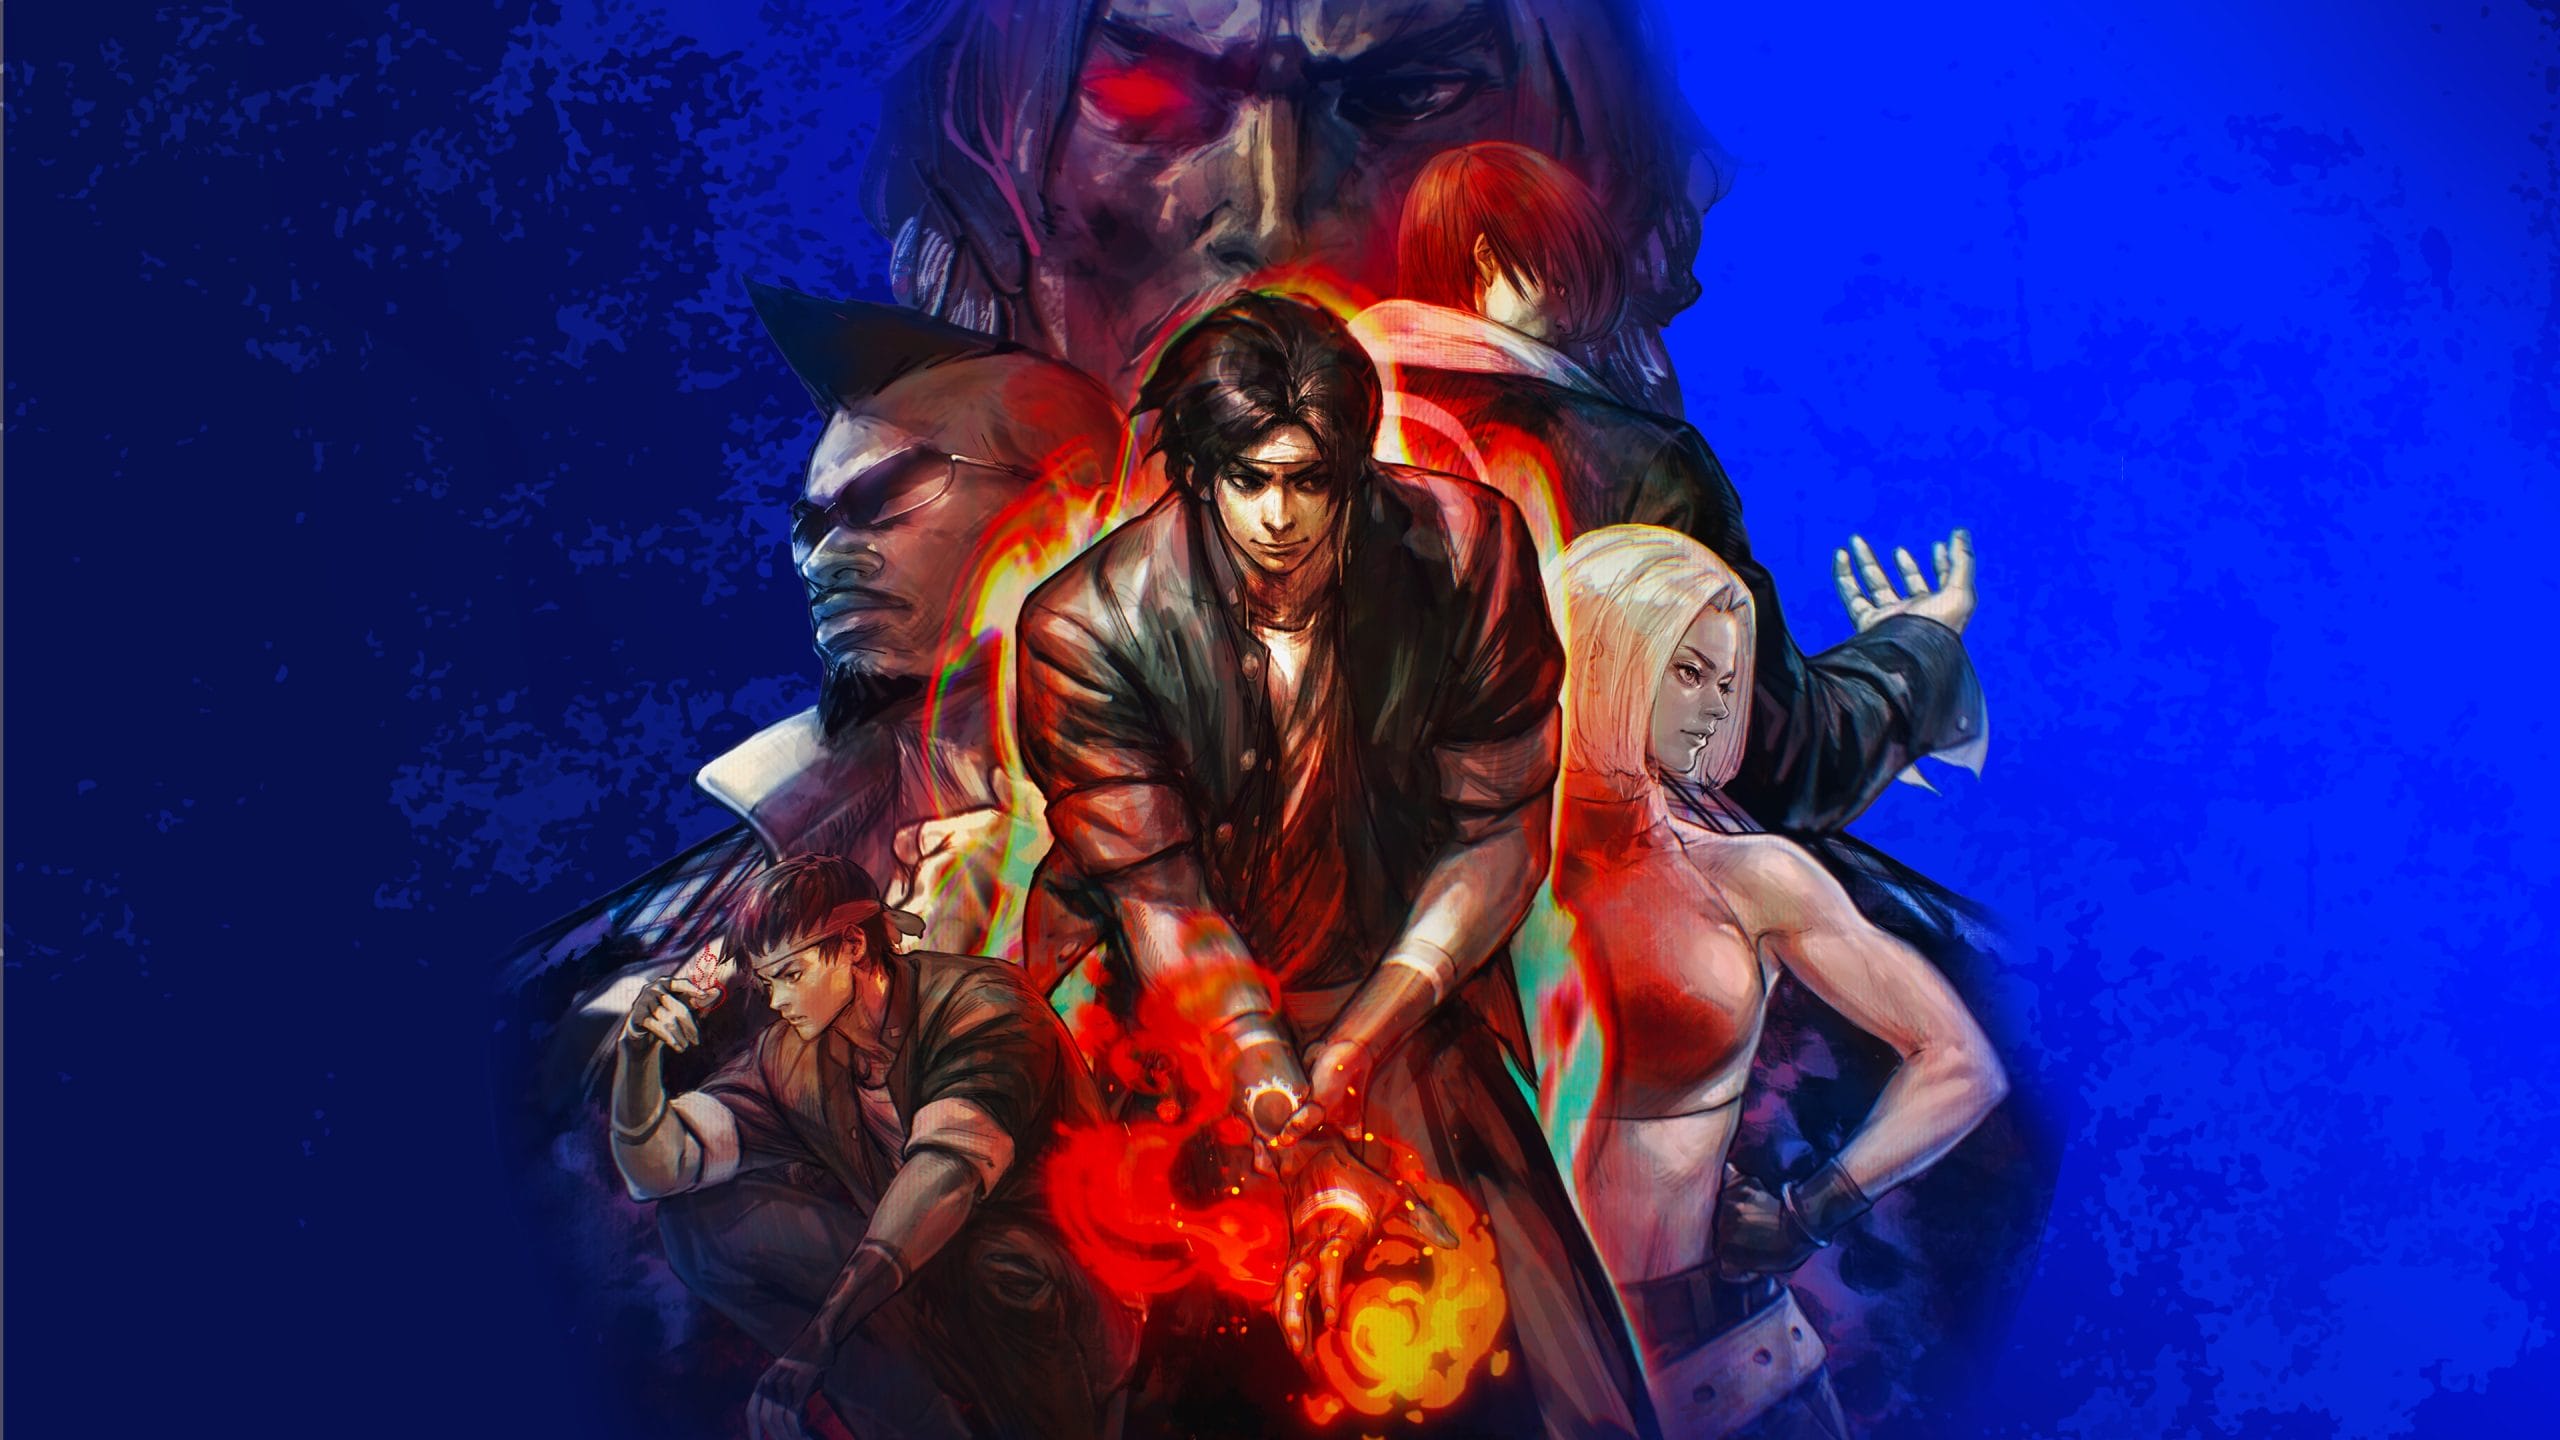 King of Fighters 2002: Unlimited Match Review (PS4) - Long Live